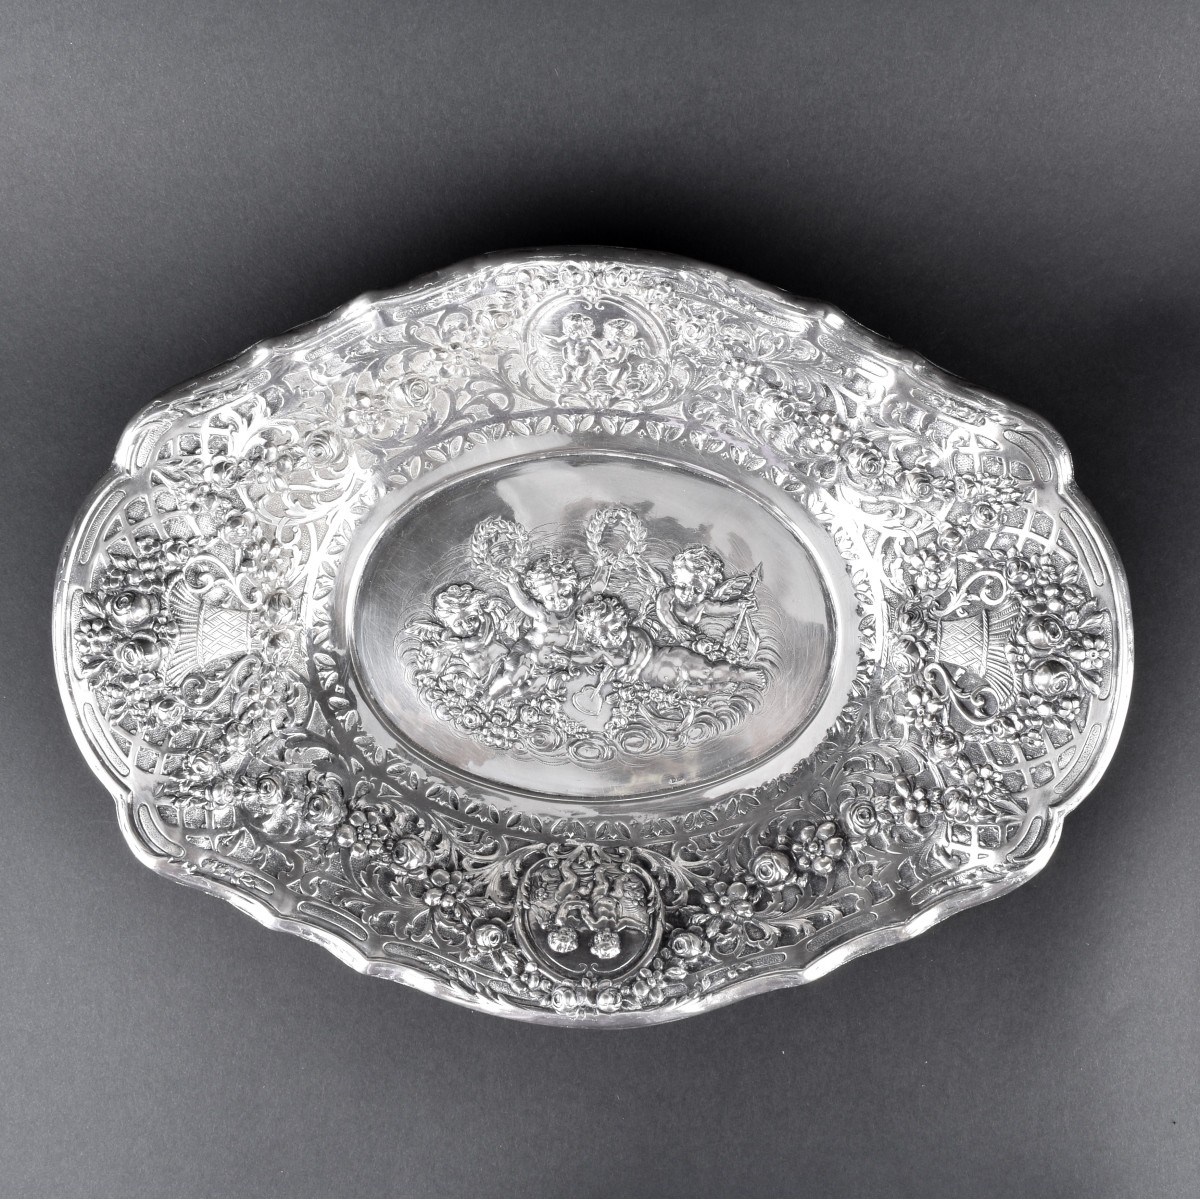 Sterling Silver Centerpiece Bowl